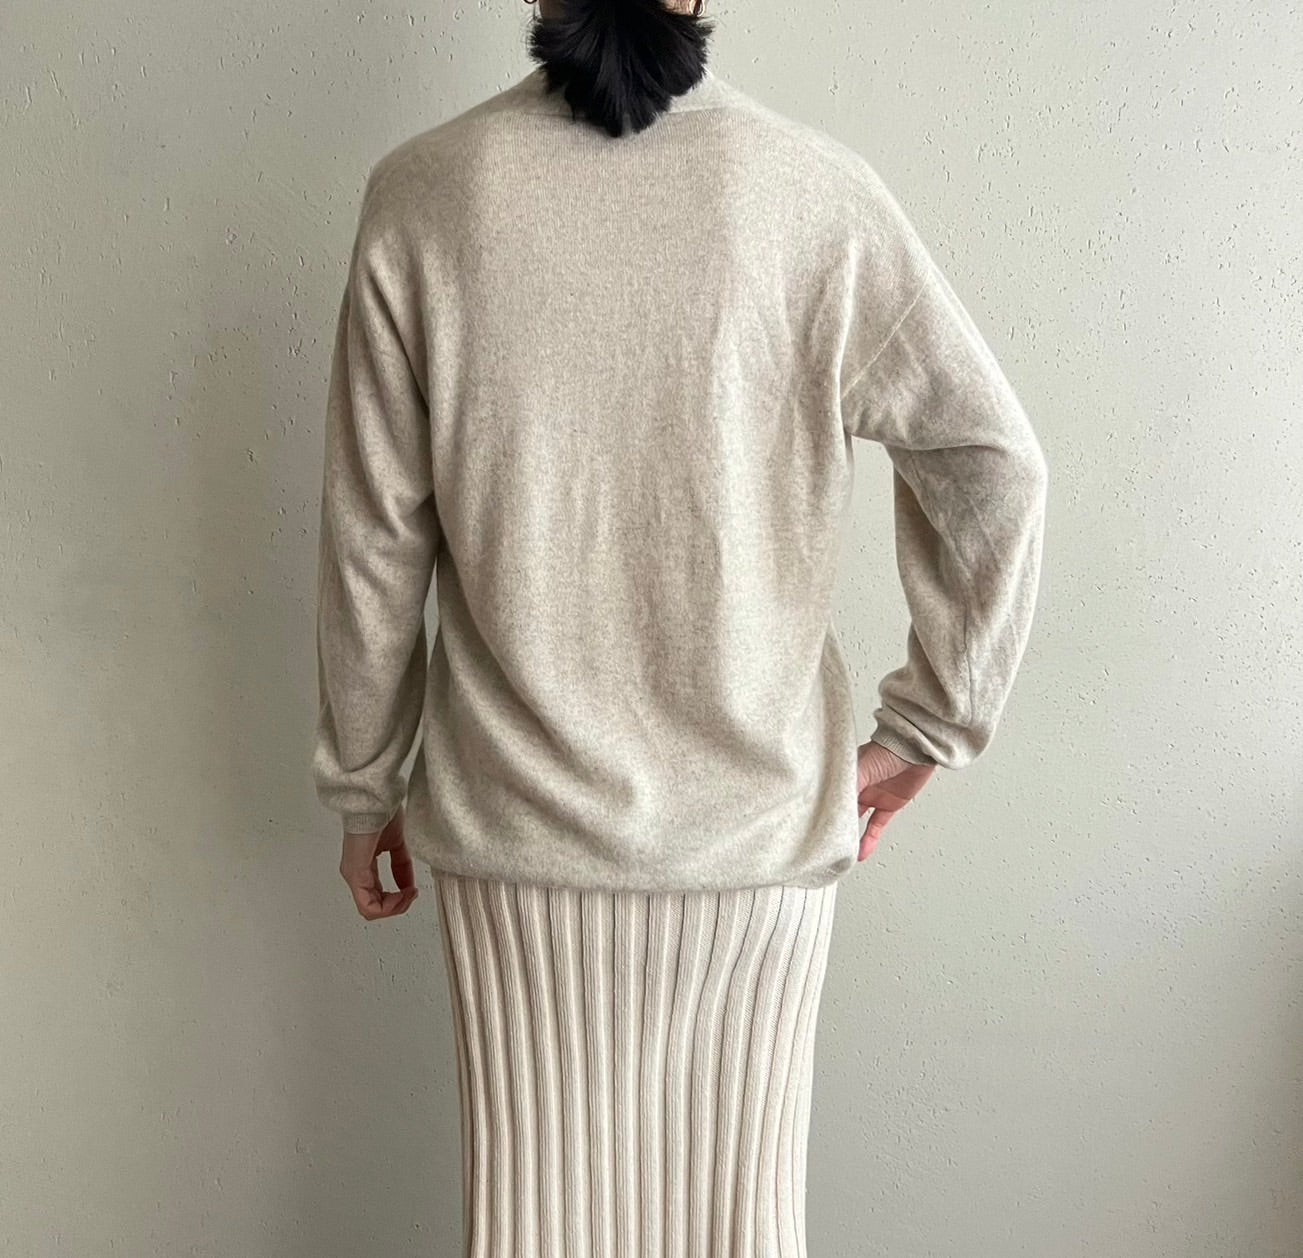 90s Cashmere Knit Top Made in Italy